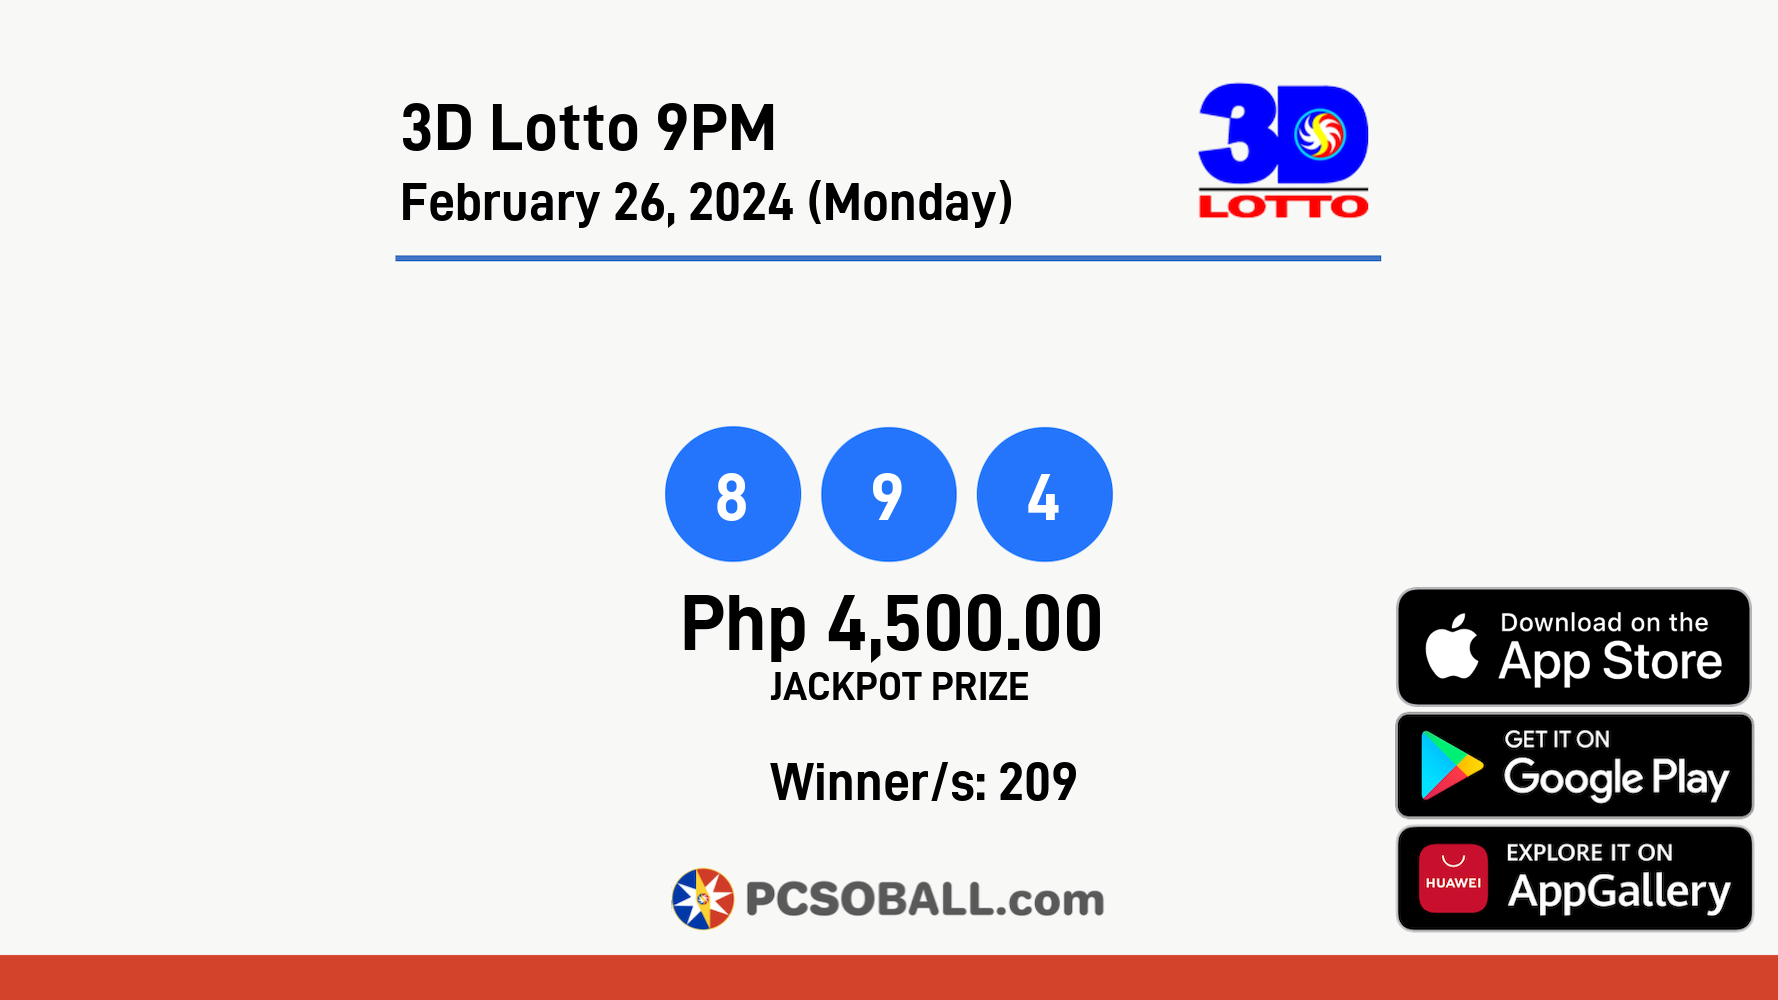 3D Lotto 9PM February 26, 2024 (Monday) Result